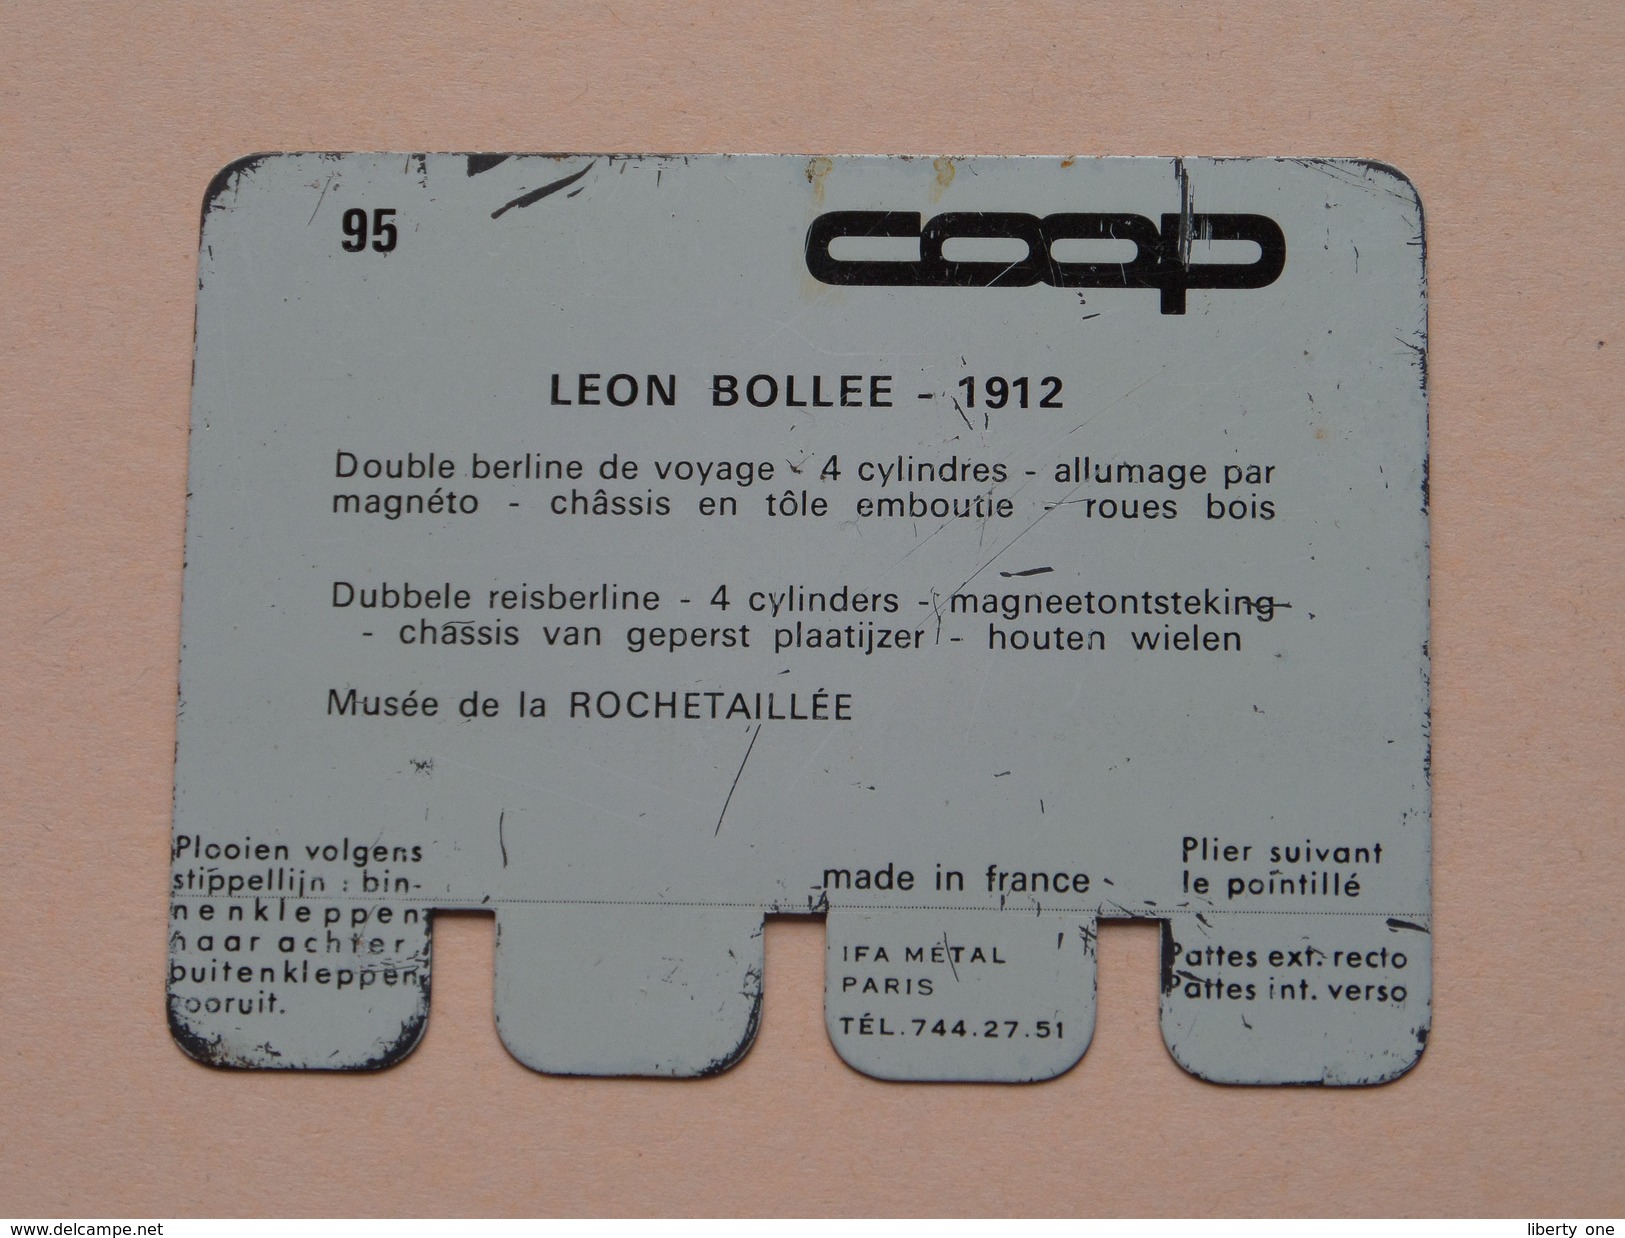 LEON BOLLEE 1912 - Coll. N° 95 NL/FR ( Plaquette C O O P - Voir Photo - IFA Metal Paris ) ! - Tin Signs (after1960)